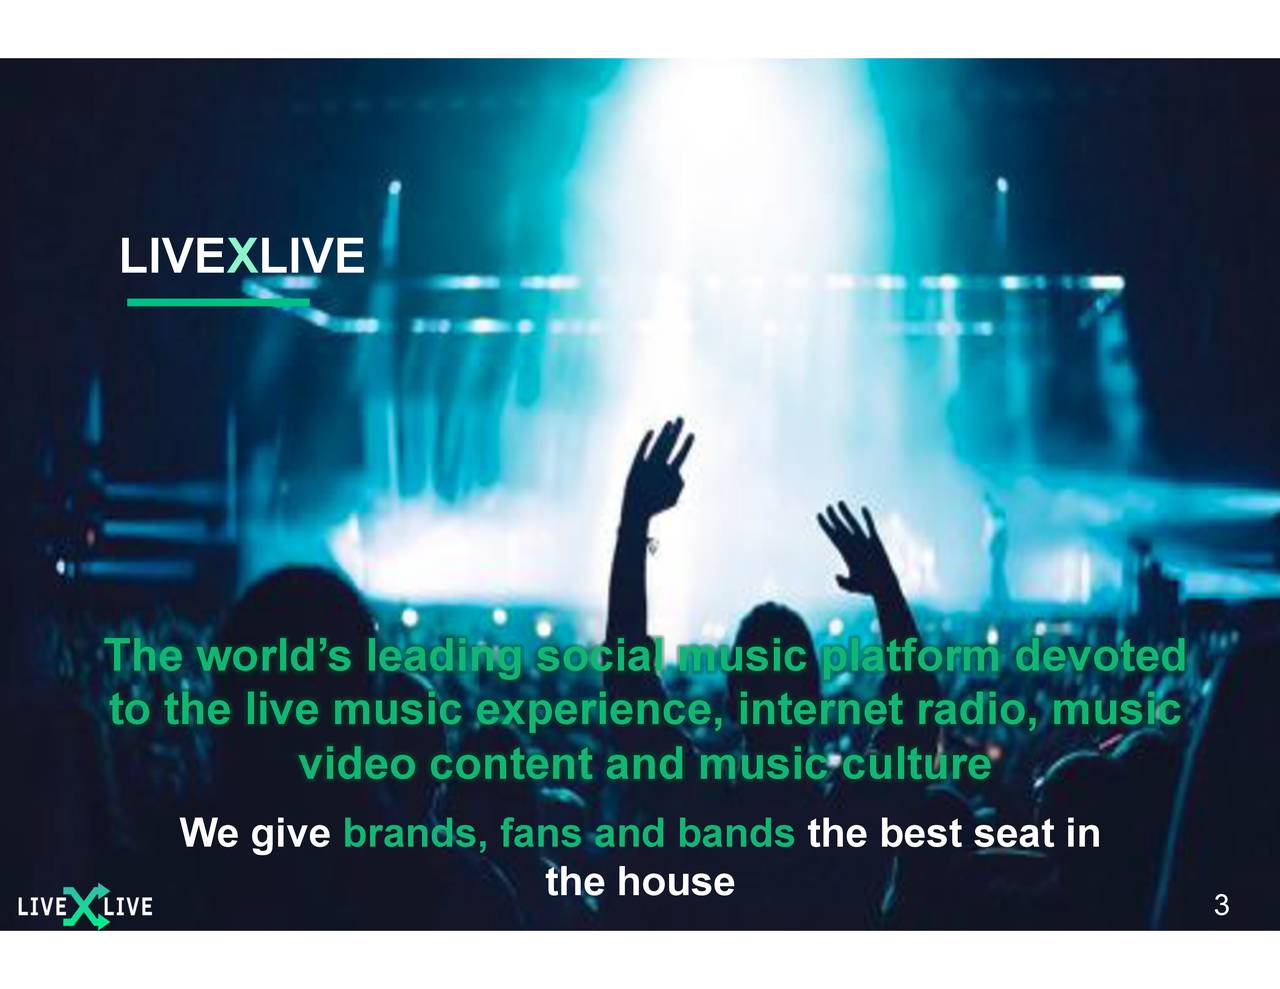 livexlive $19.99 a year